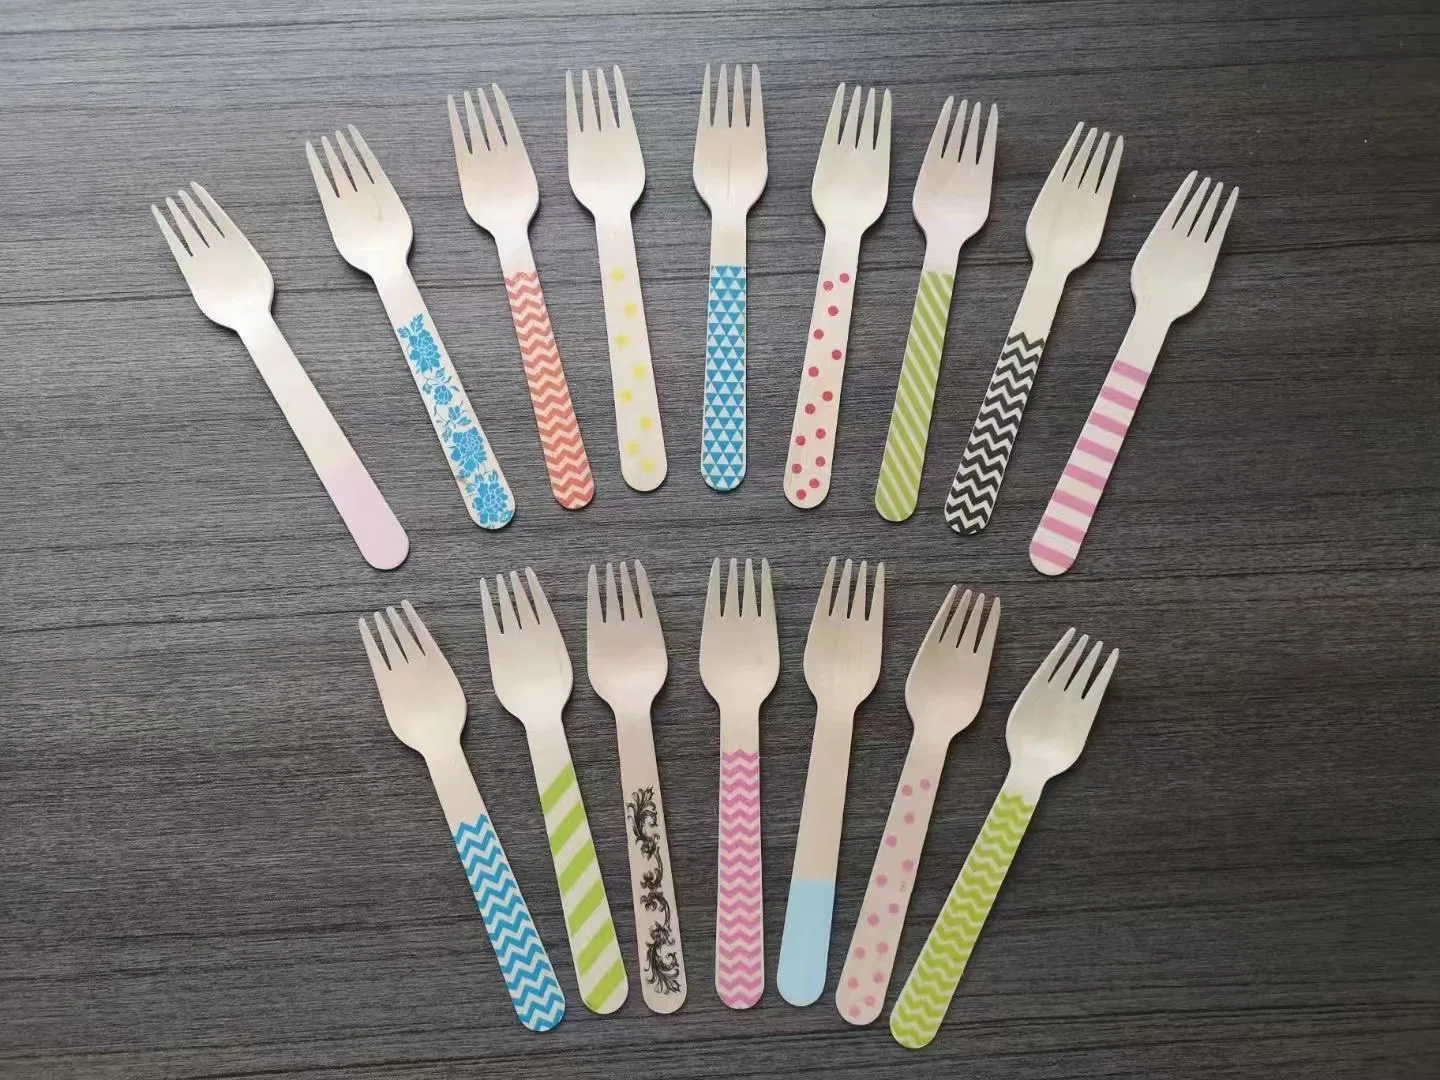 100 Pack Wooden Cutlery Set - Forks, Spoons, Knives Biodegradable Tableware Wooden Cutlery